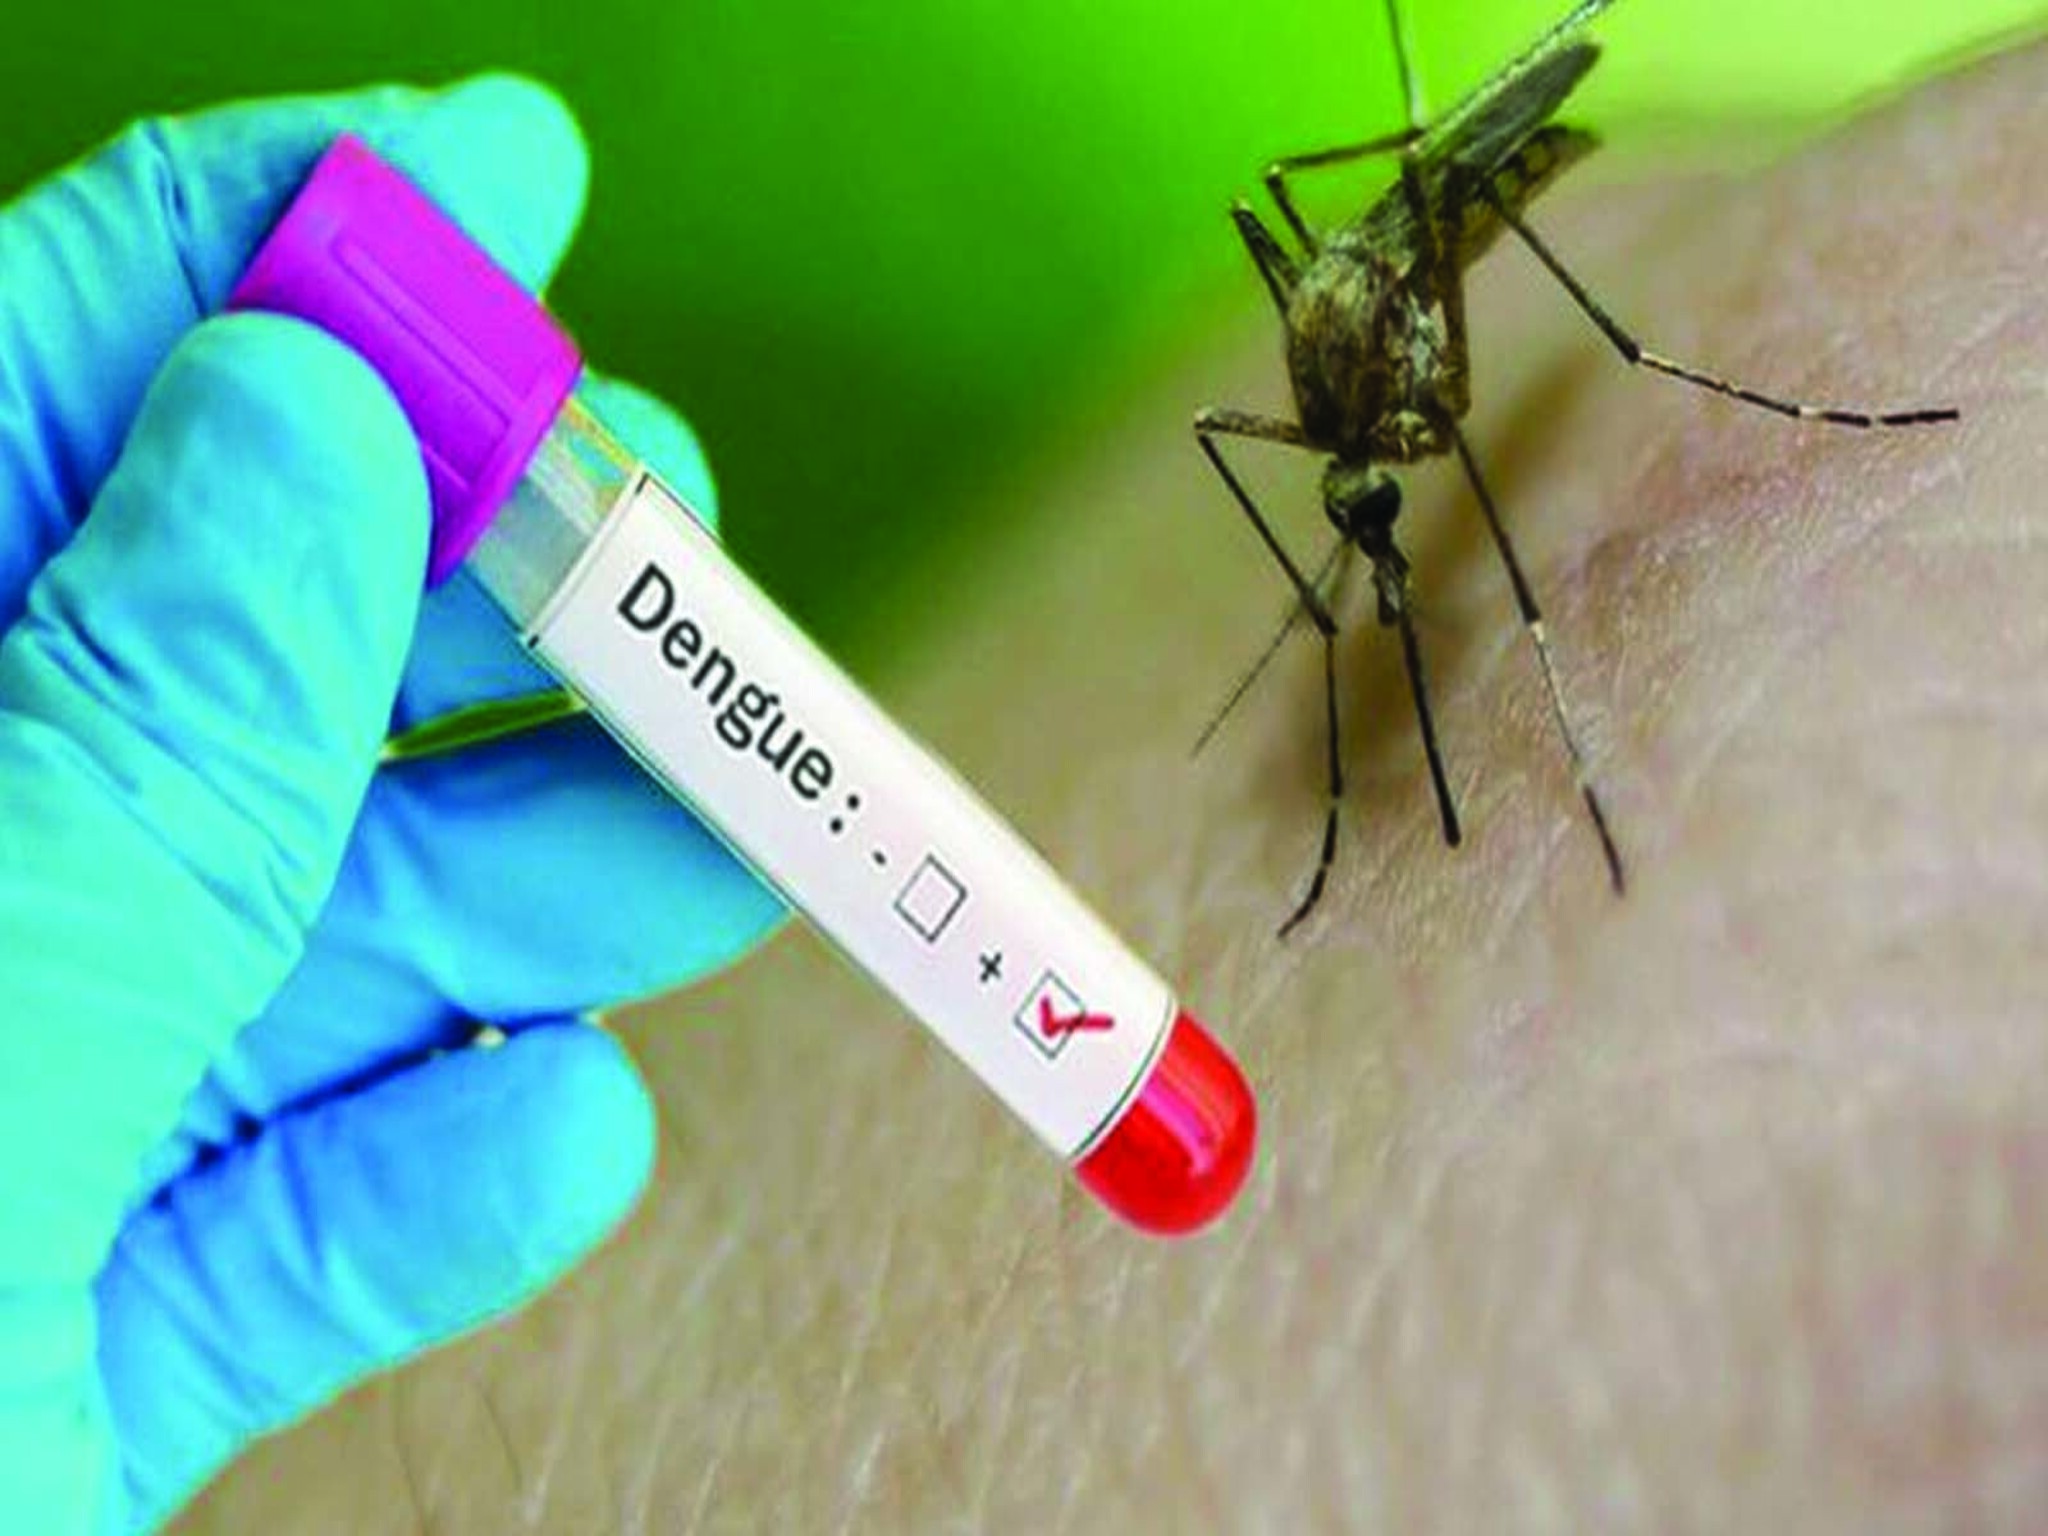 Panic in the Emirates due to the spread of dengue fever due to stagnant rain water